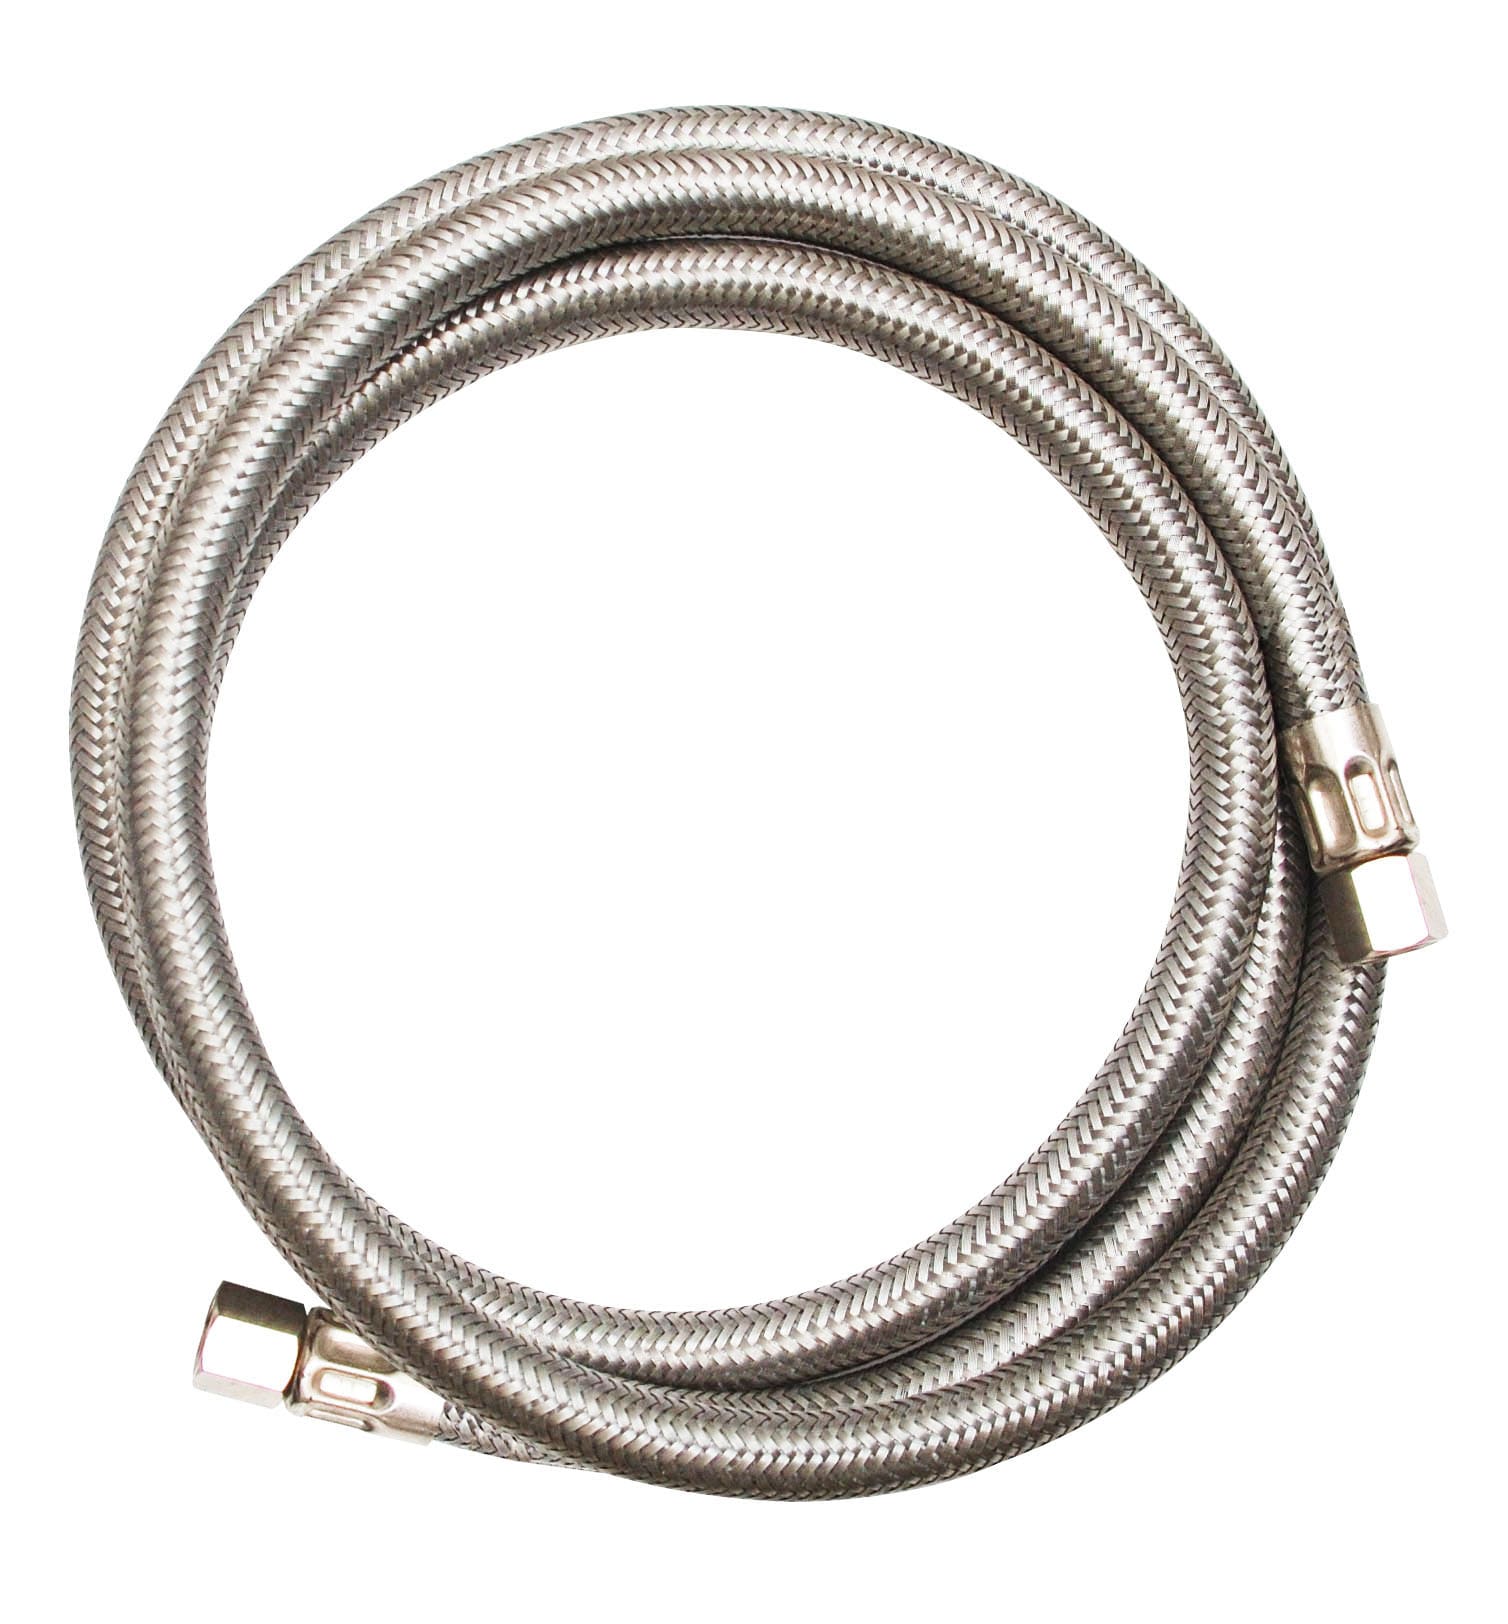 Refrigerator Stainless Braided Ice Water Supply Line 1/4" Comp X 1/4" Comp X 72" 